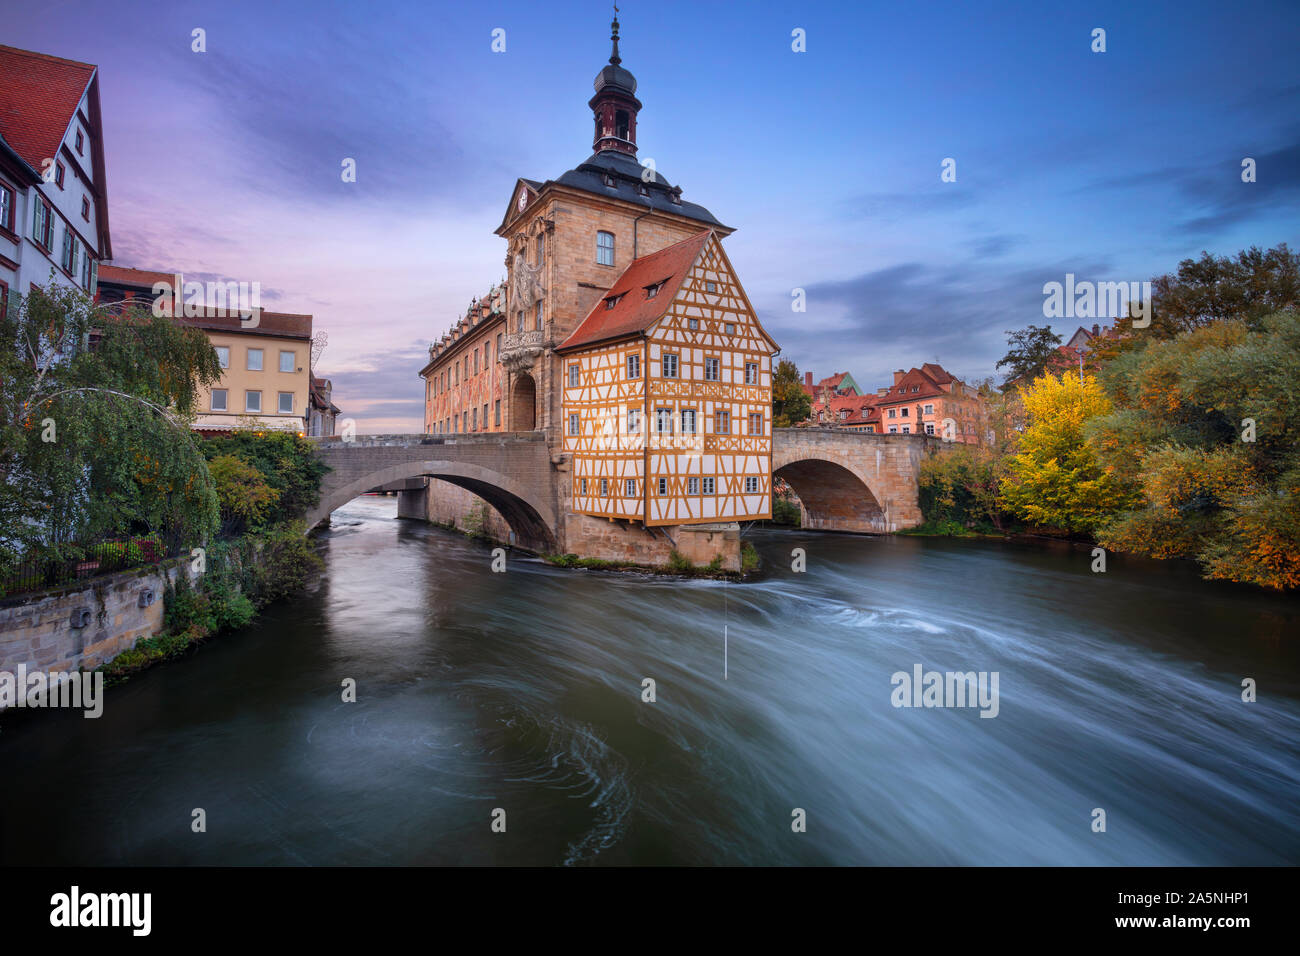 Bamberg, Germany. Cityscape image of old town Bamberg, Germany during autumn sunset. Stock Photo